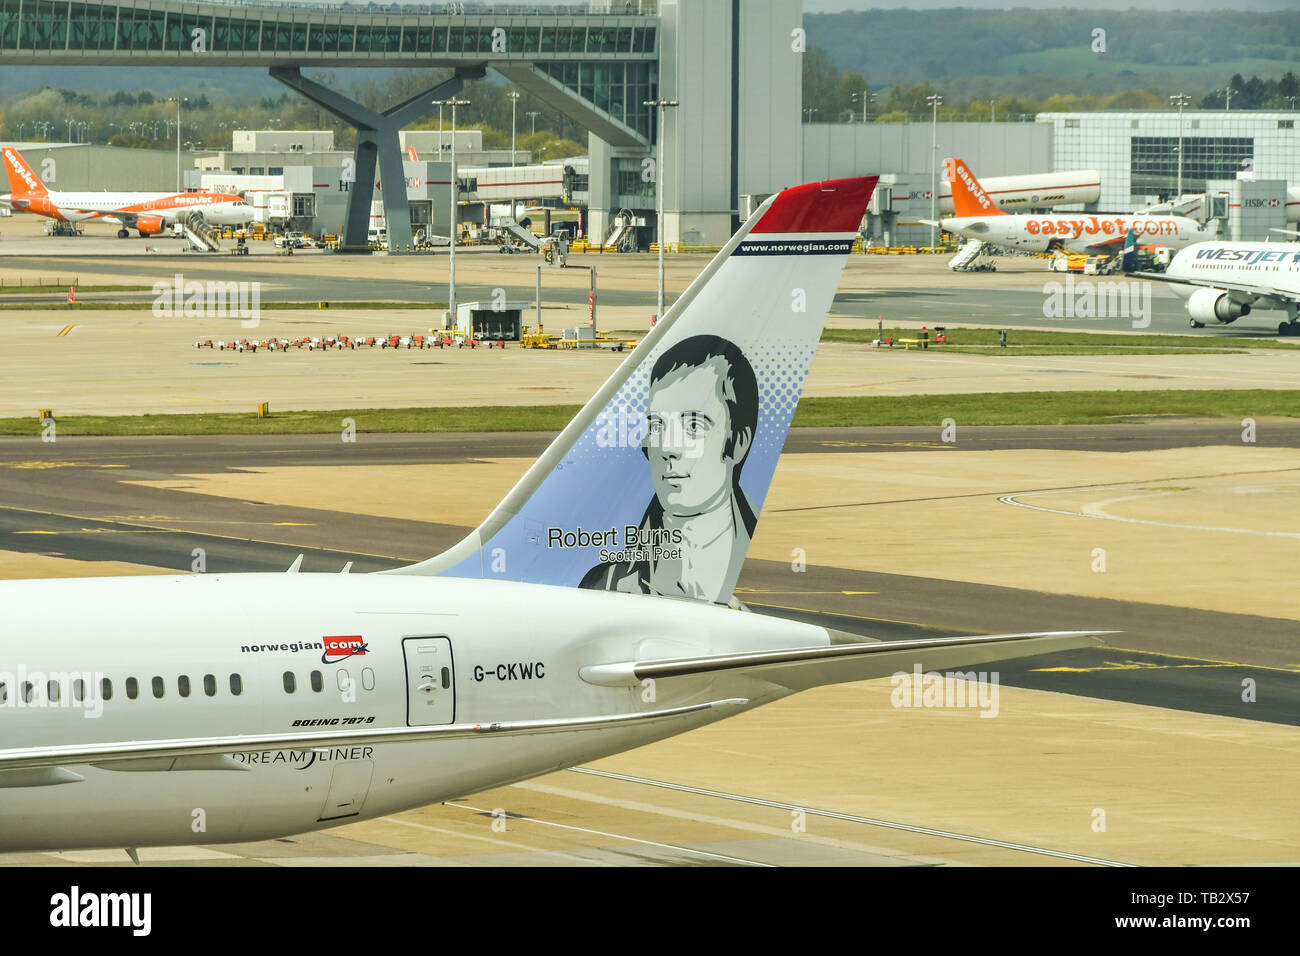 LONDON GATWICK AIRPORT, ENGLAND - APRIL 2019: Artwork on the tail of a plane operated by low cost carrier Norwegian Air at London Gatwick Airport. . Stock Photo